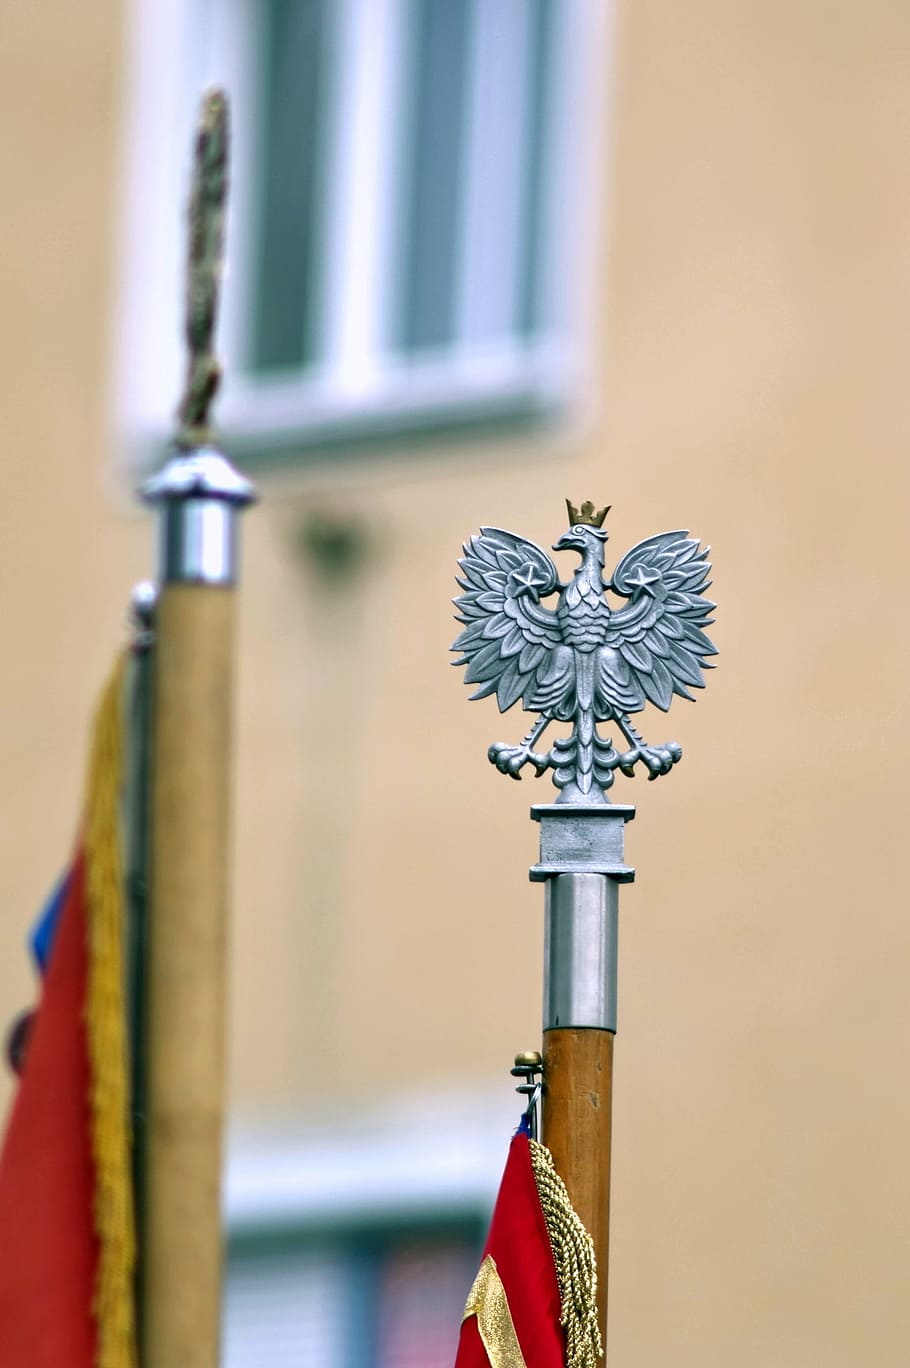 Eagle, Sign, Military, History, the military, history, cavalry, monument, the war, soldiers, militaria